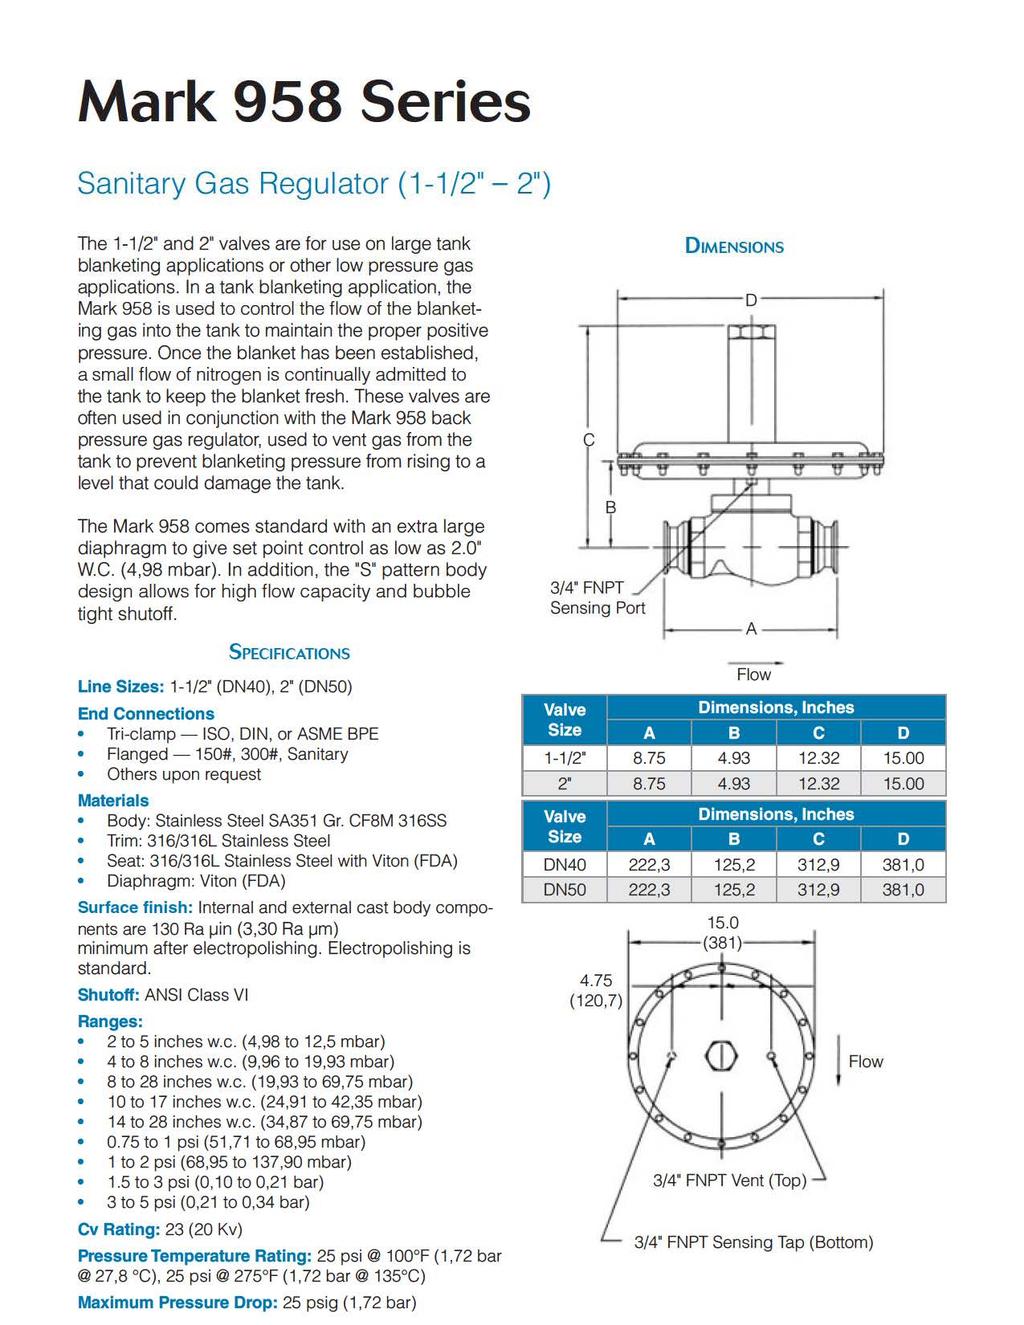 Mark 958 Series Sanitary Gas Regulator (1-1/2" - 2") The 1-1 /2" and 2" valves are for use on large tank blanketing applications or other low pressure gas applications.